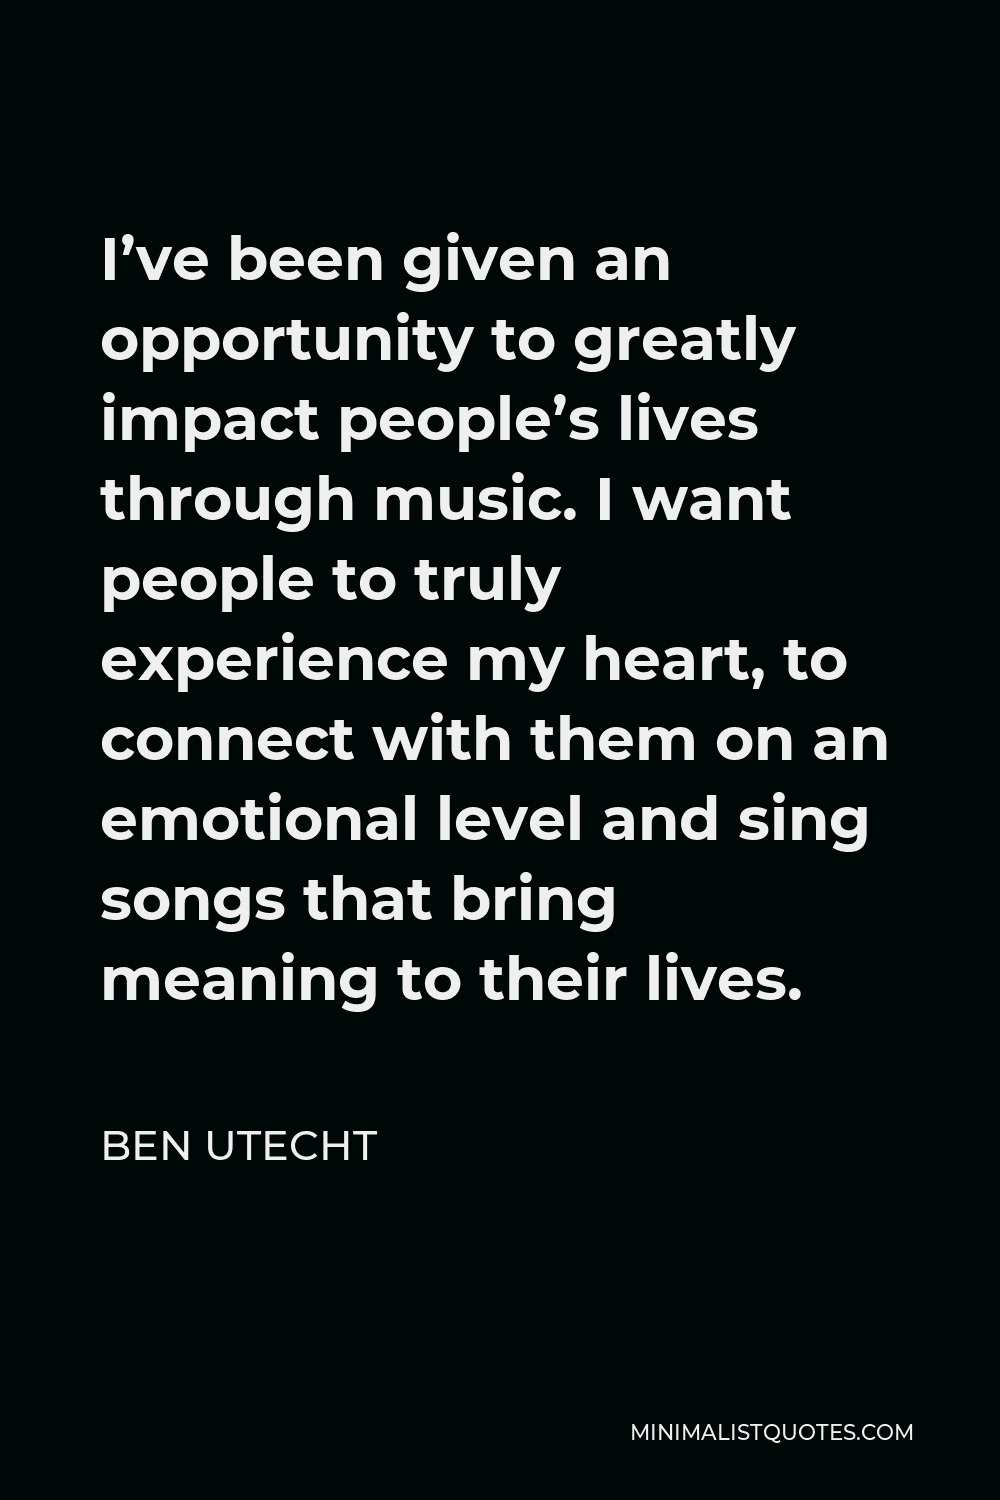 Ben Utecht Quote - I’ve been given an opportunity to greatly impact people’s lives through music. I want people to truly experience my heart, to connect with them on an emotional level and sing songs that bring meaning to their lives.